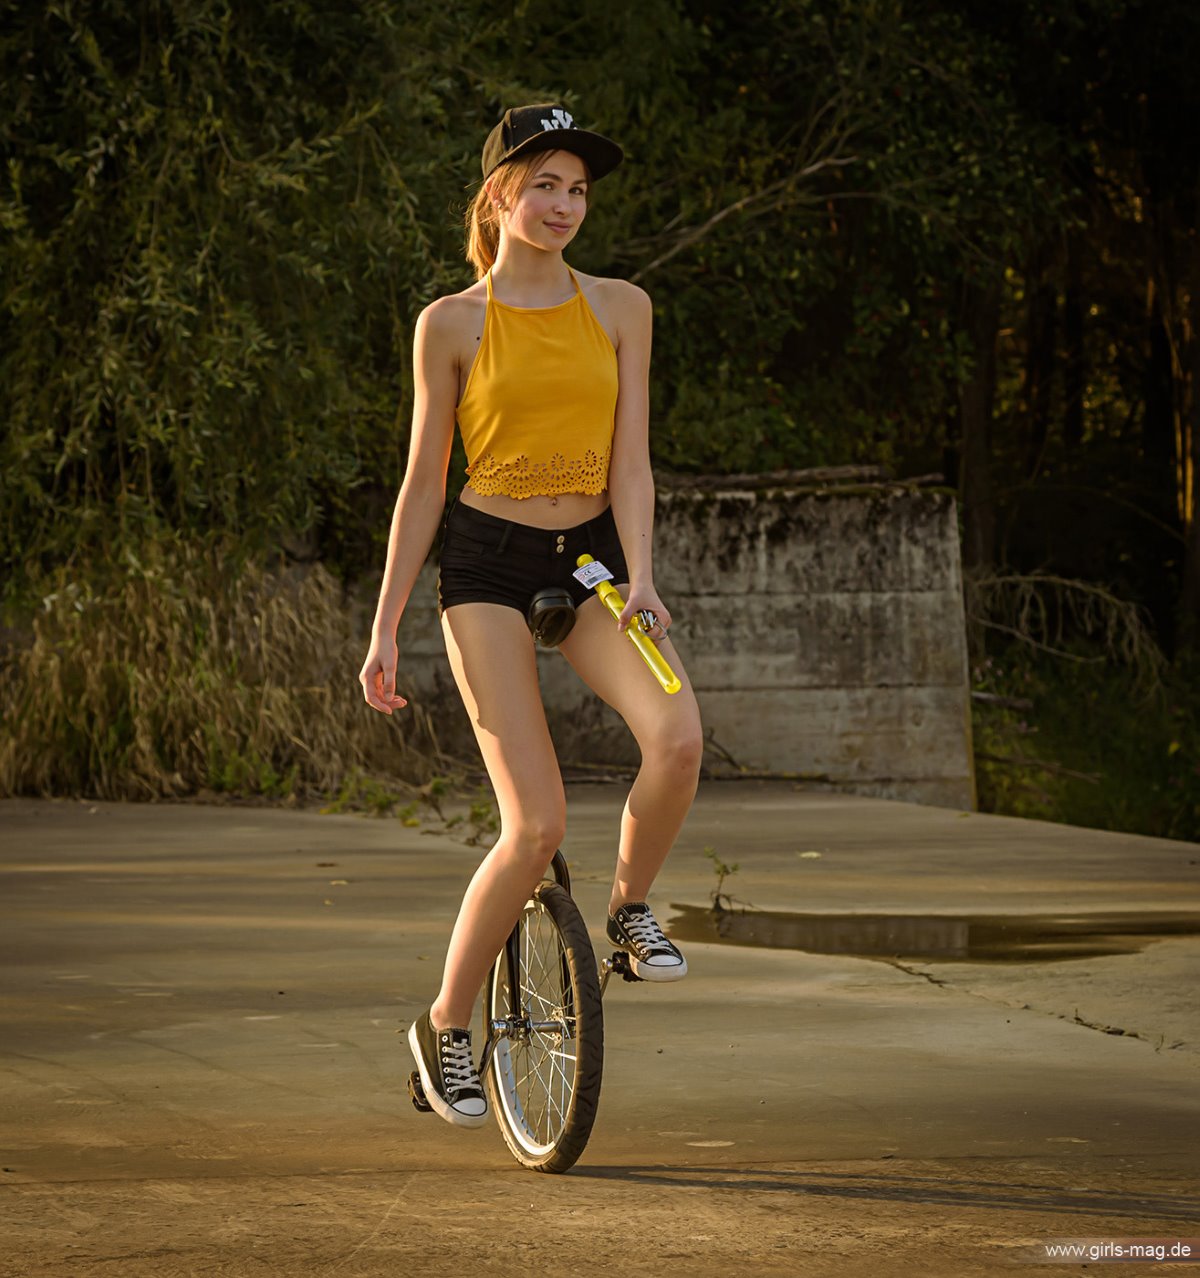 Girls Mag Annika Bubbles on a Unicycle 0034 8874738628.jpg